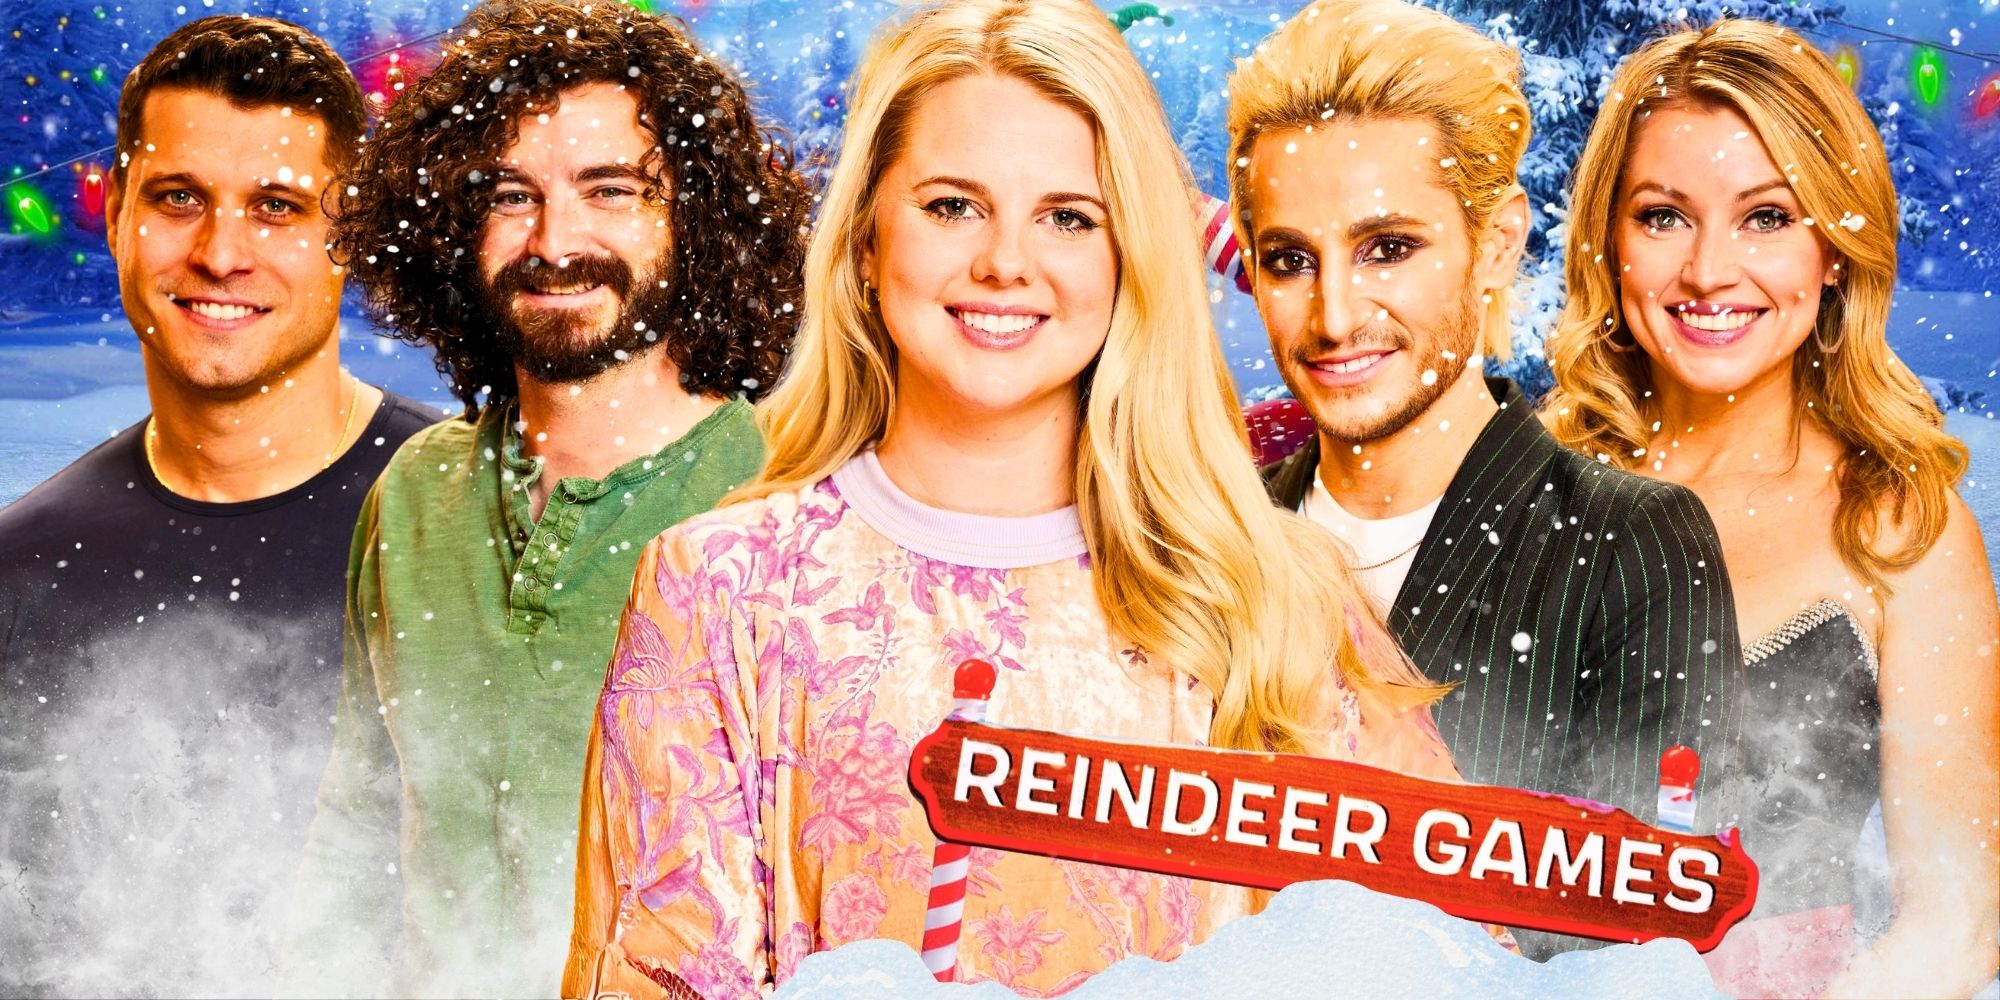 Big Brother Reindeer Games Proves This Contestant Is Most Entertaining